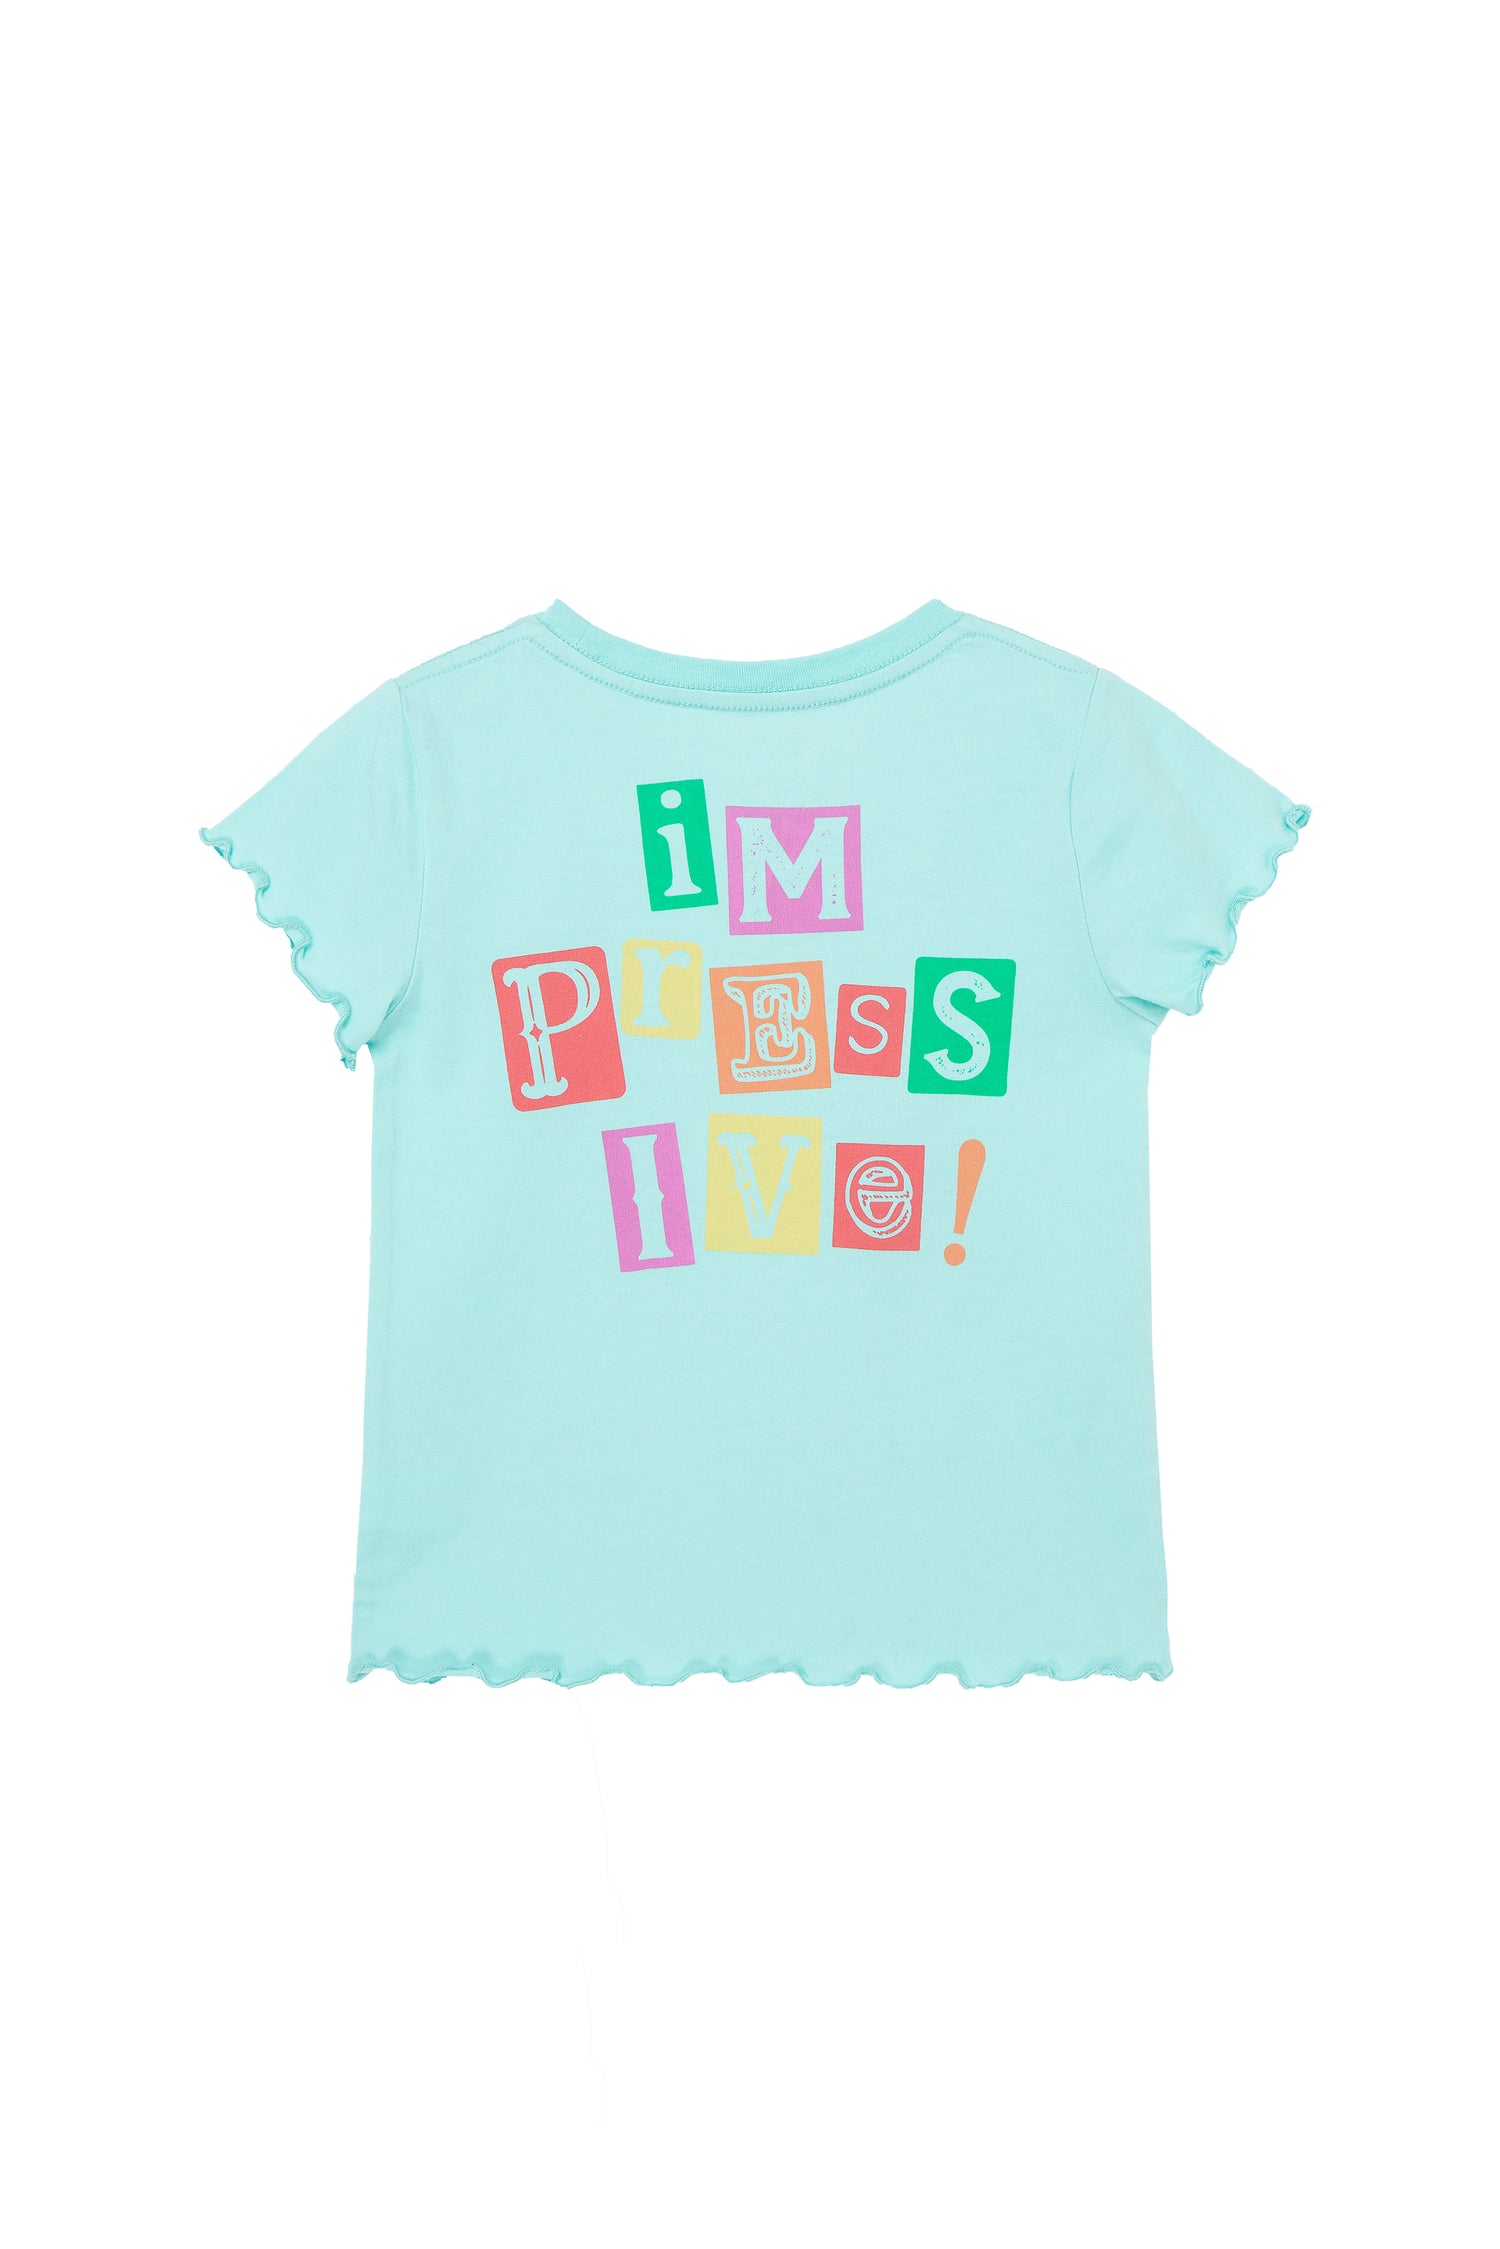 Aqua blue tee shirt with ruffled short sleeves, "impressive!" multicolored text on front